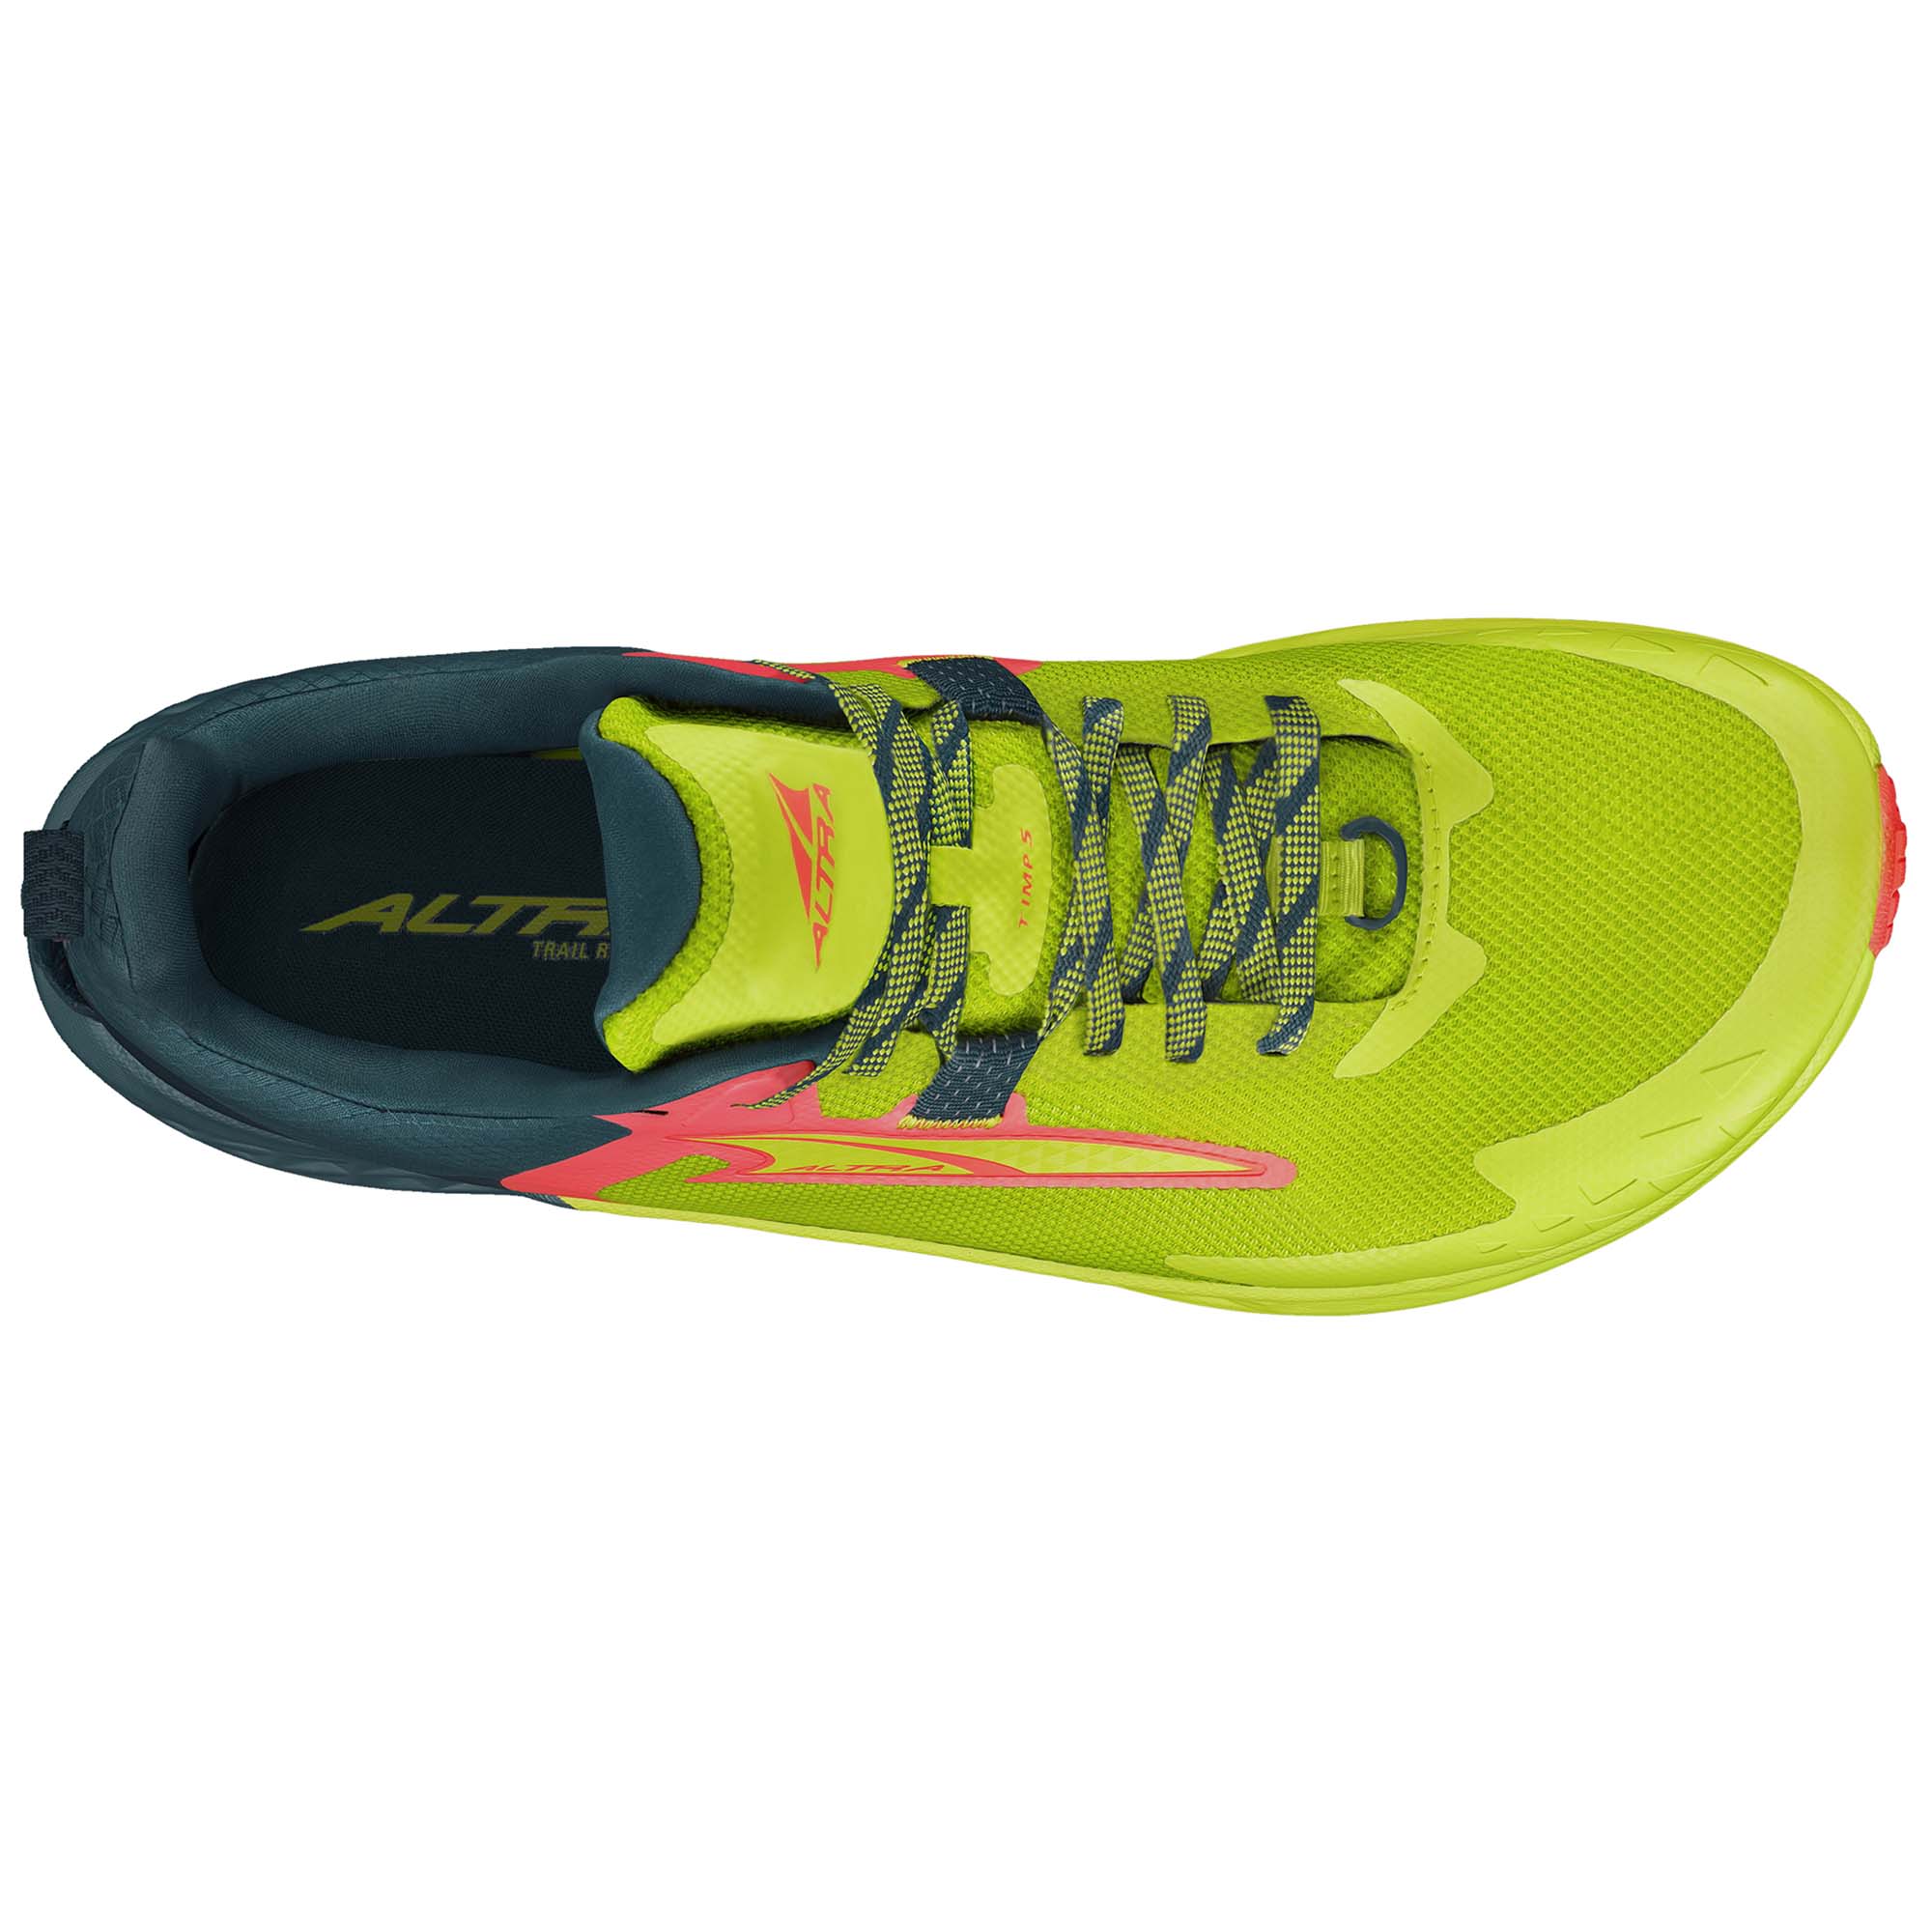 Altra Timp 5 Off-Road Running Shoes